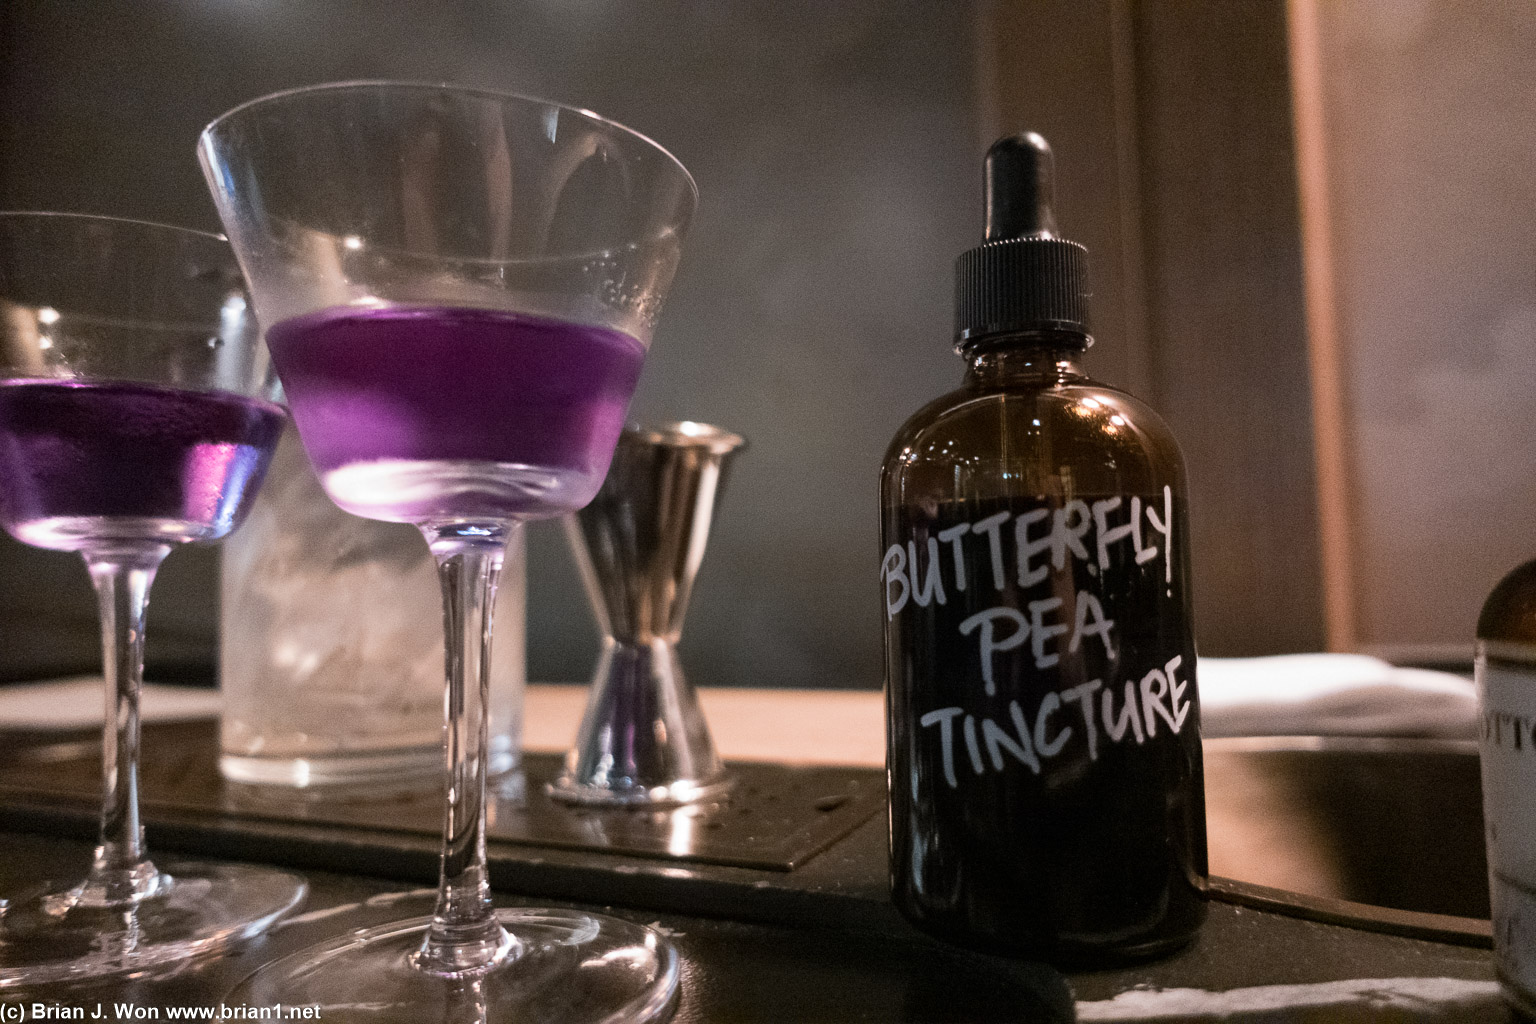 Butterfly pea tincture.